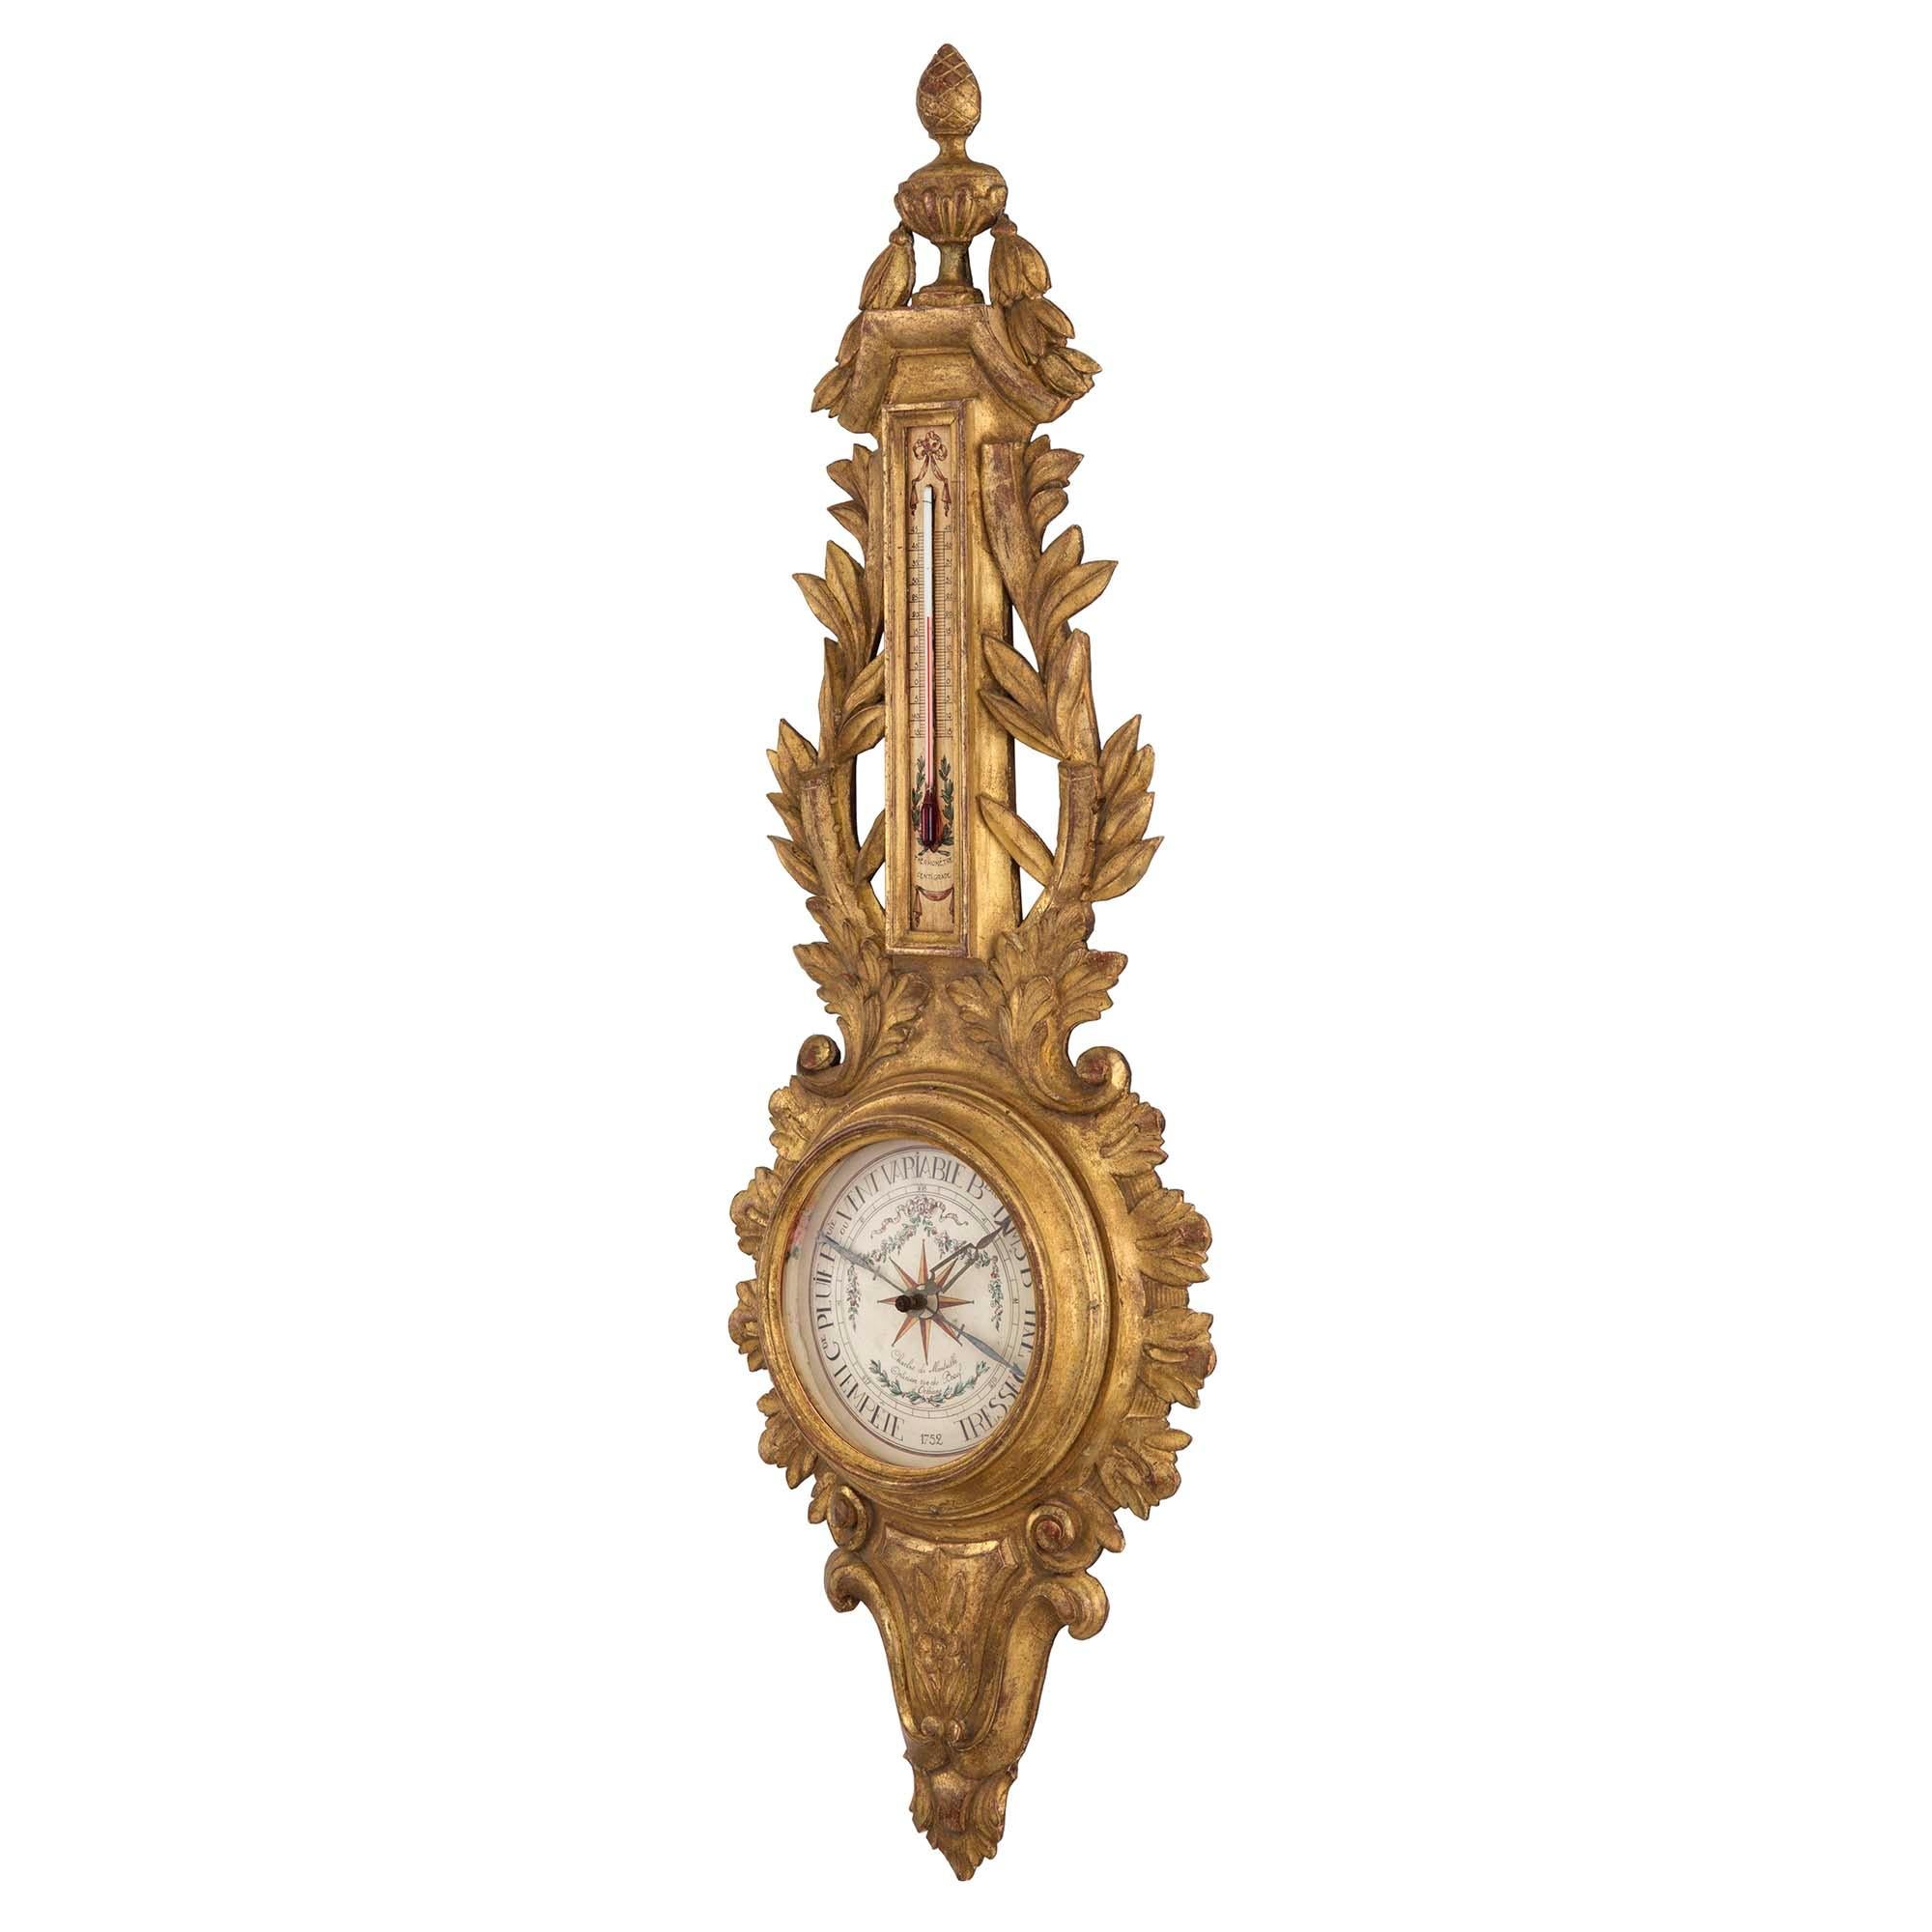 A very handsome and decorative French late 19th century Louis XVI st. giltwood barometer. Fine carvings of scrolls and foliate throughout with a lyre shape above the painted barometer façade. At the top above the thermometer is an impressive urn